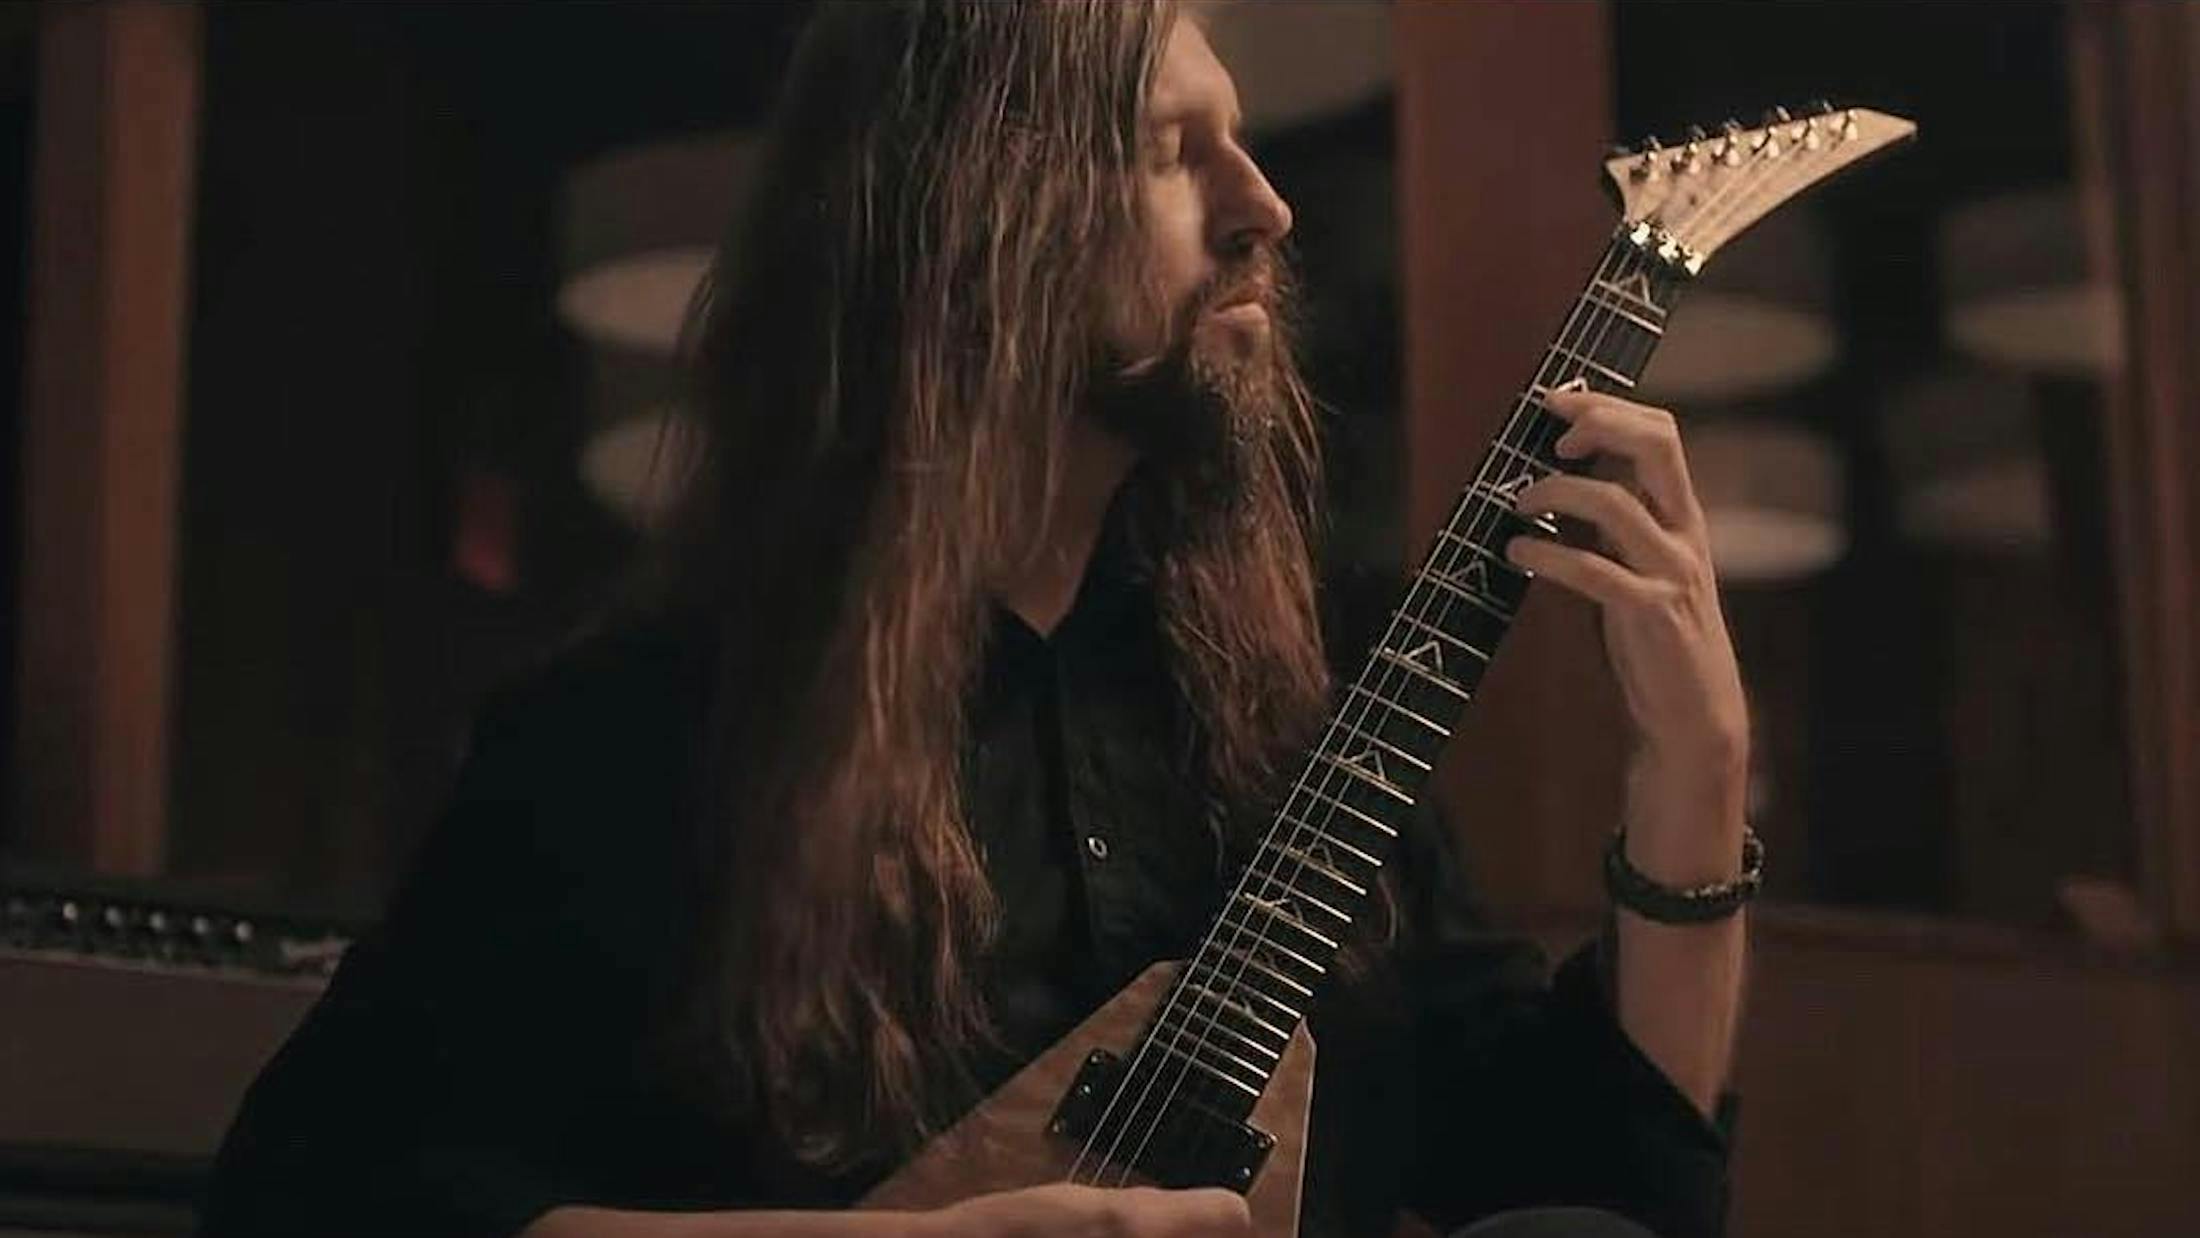 All That Remains Guitarist Oli Herbert's Death Now Being Treated As Suspicious